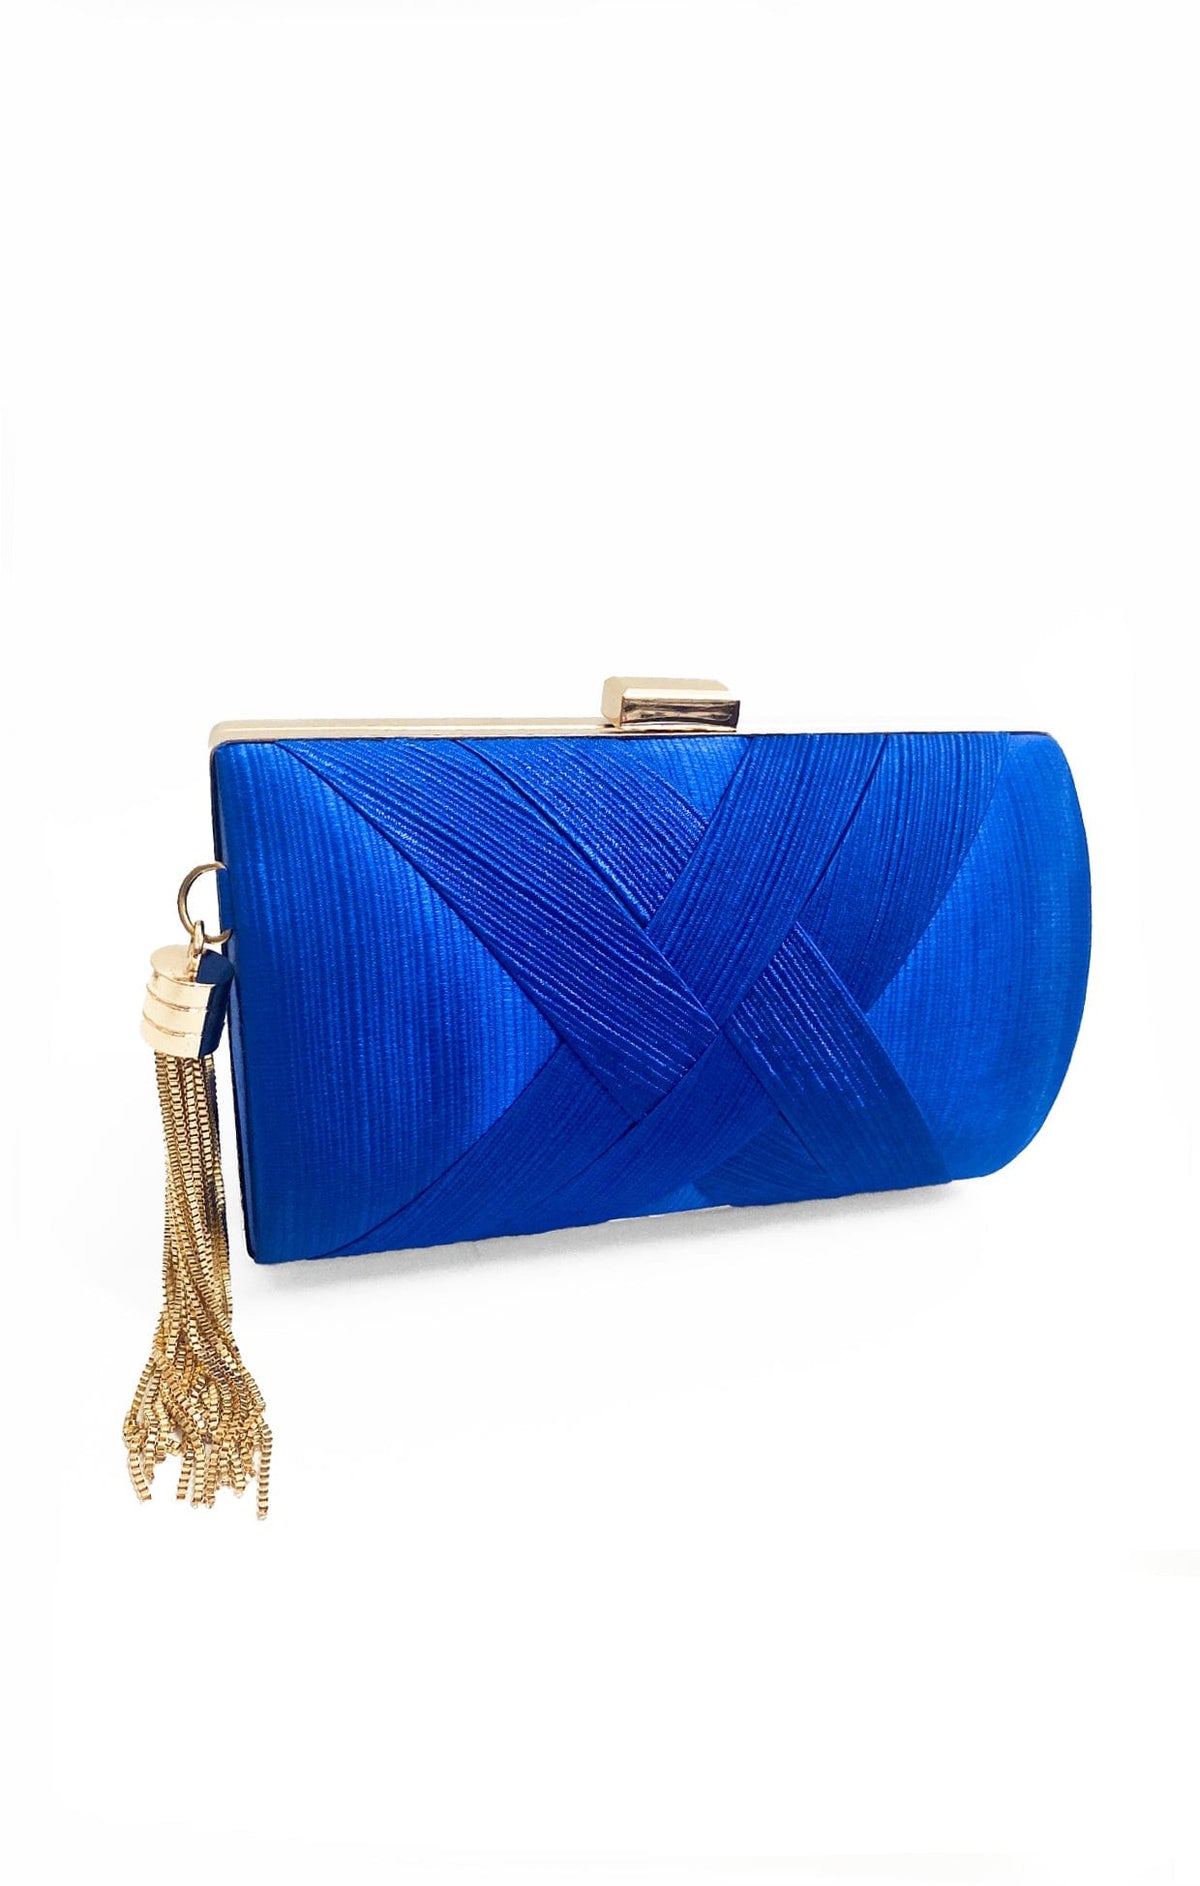 ACCESSORIES Bags Clutches One Size / Blue DEANNA EVENING BAG IN BLUE